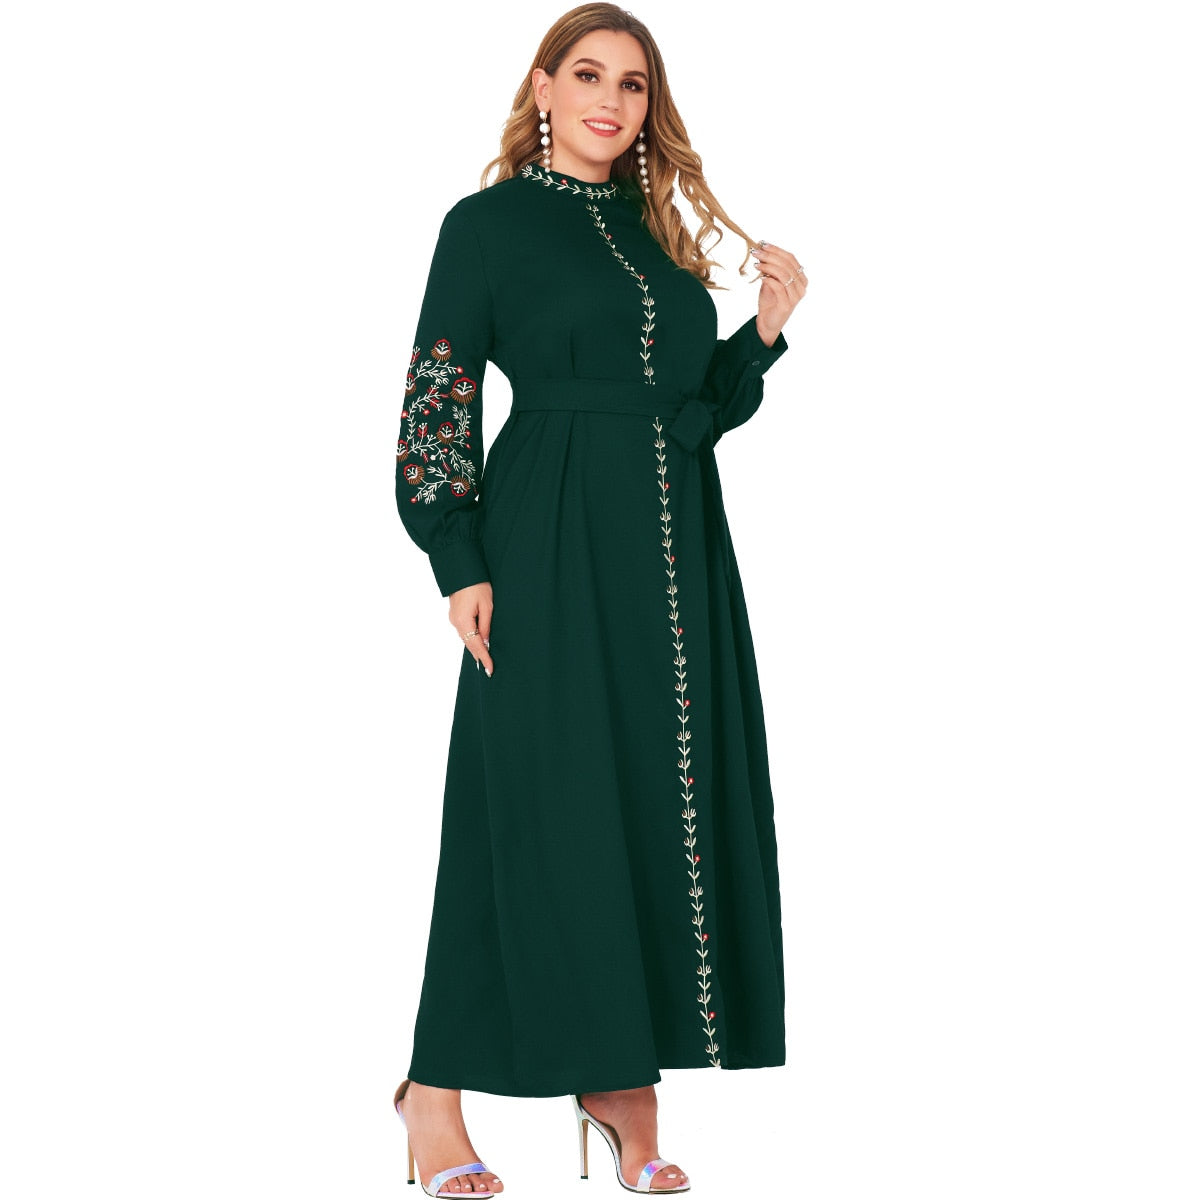 New Summer Dress Woman Plus Size Dark Green Resort Stand Collar Floral Embroidery Long Sleeve Loose Sashes Elegant Robes